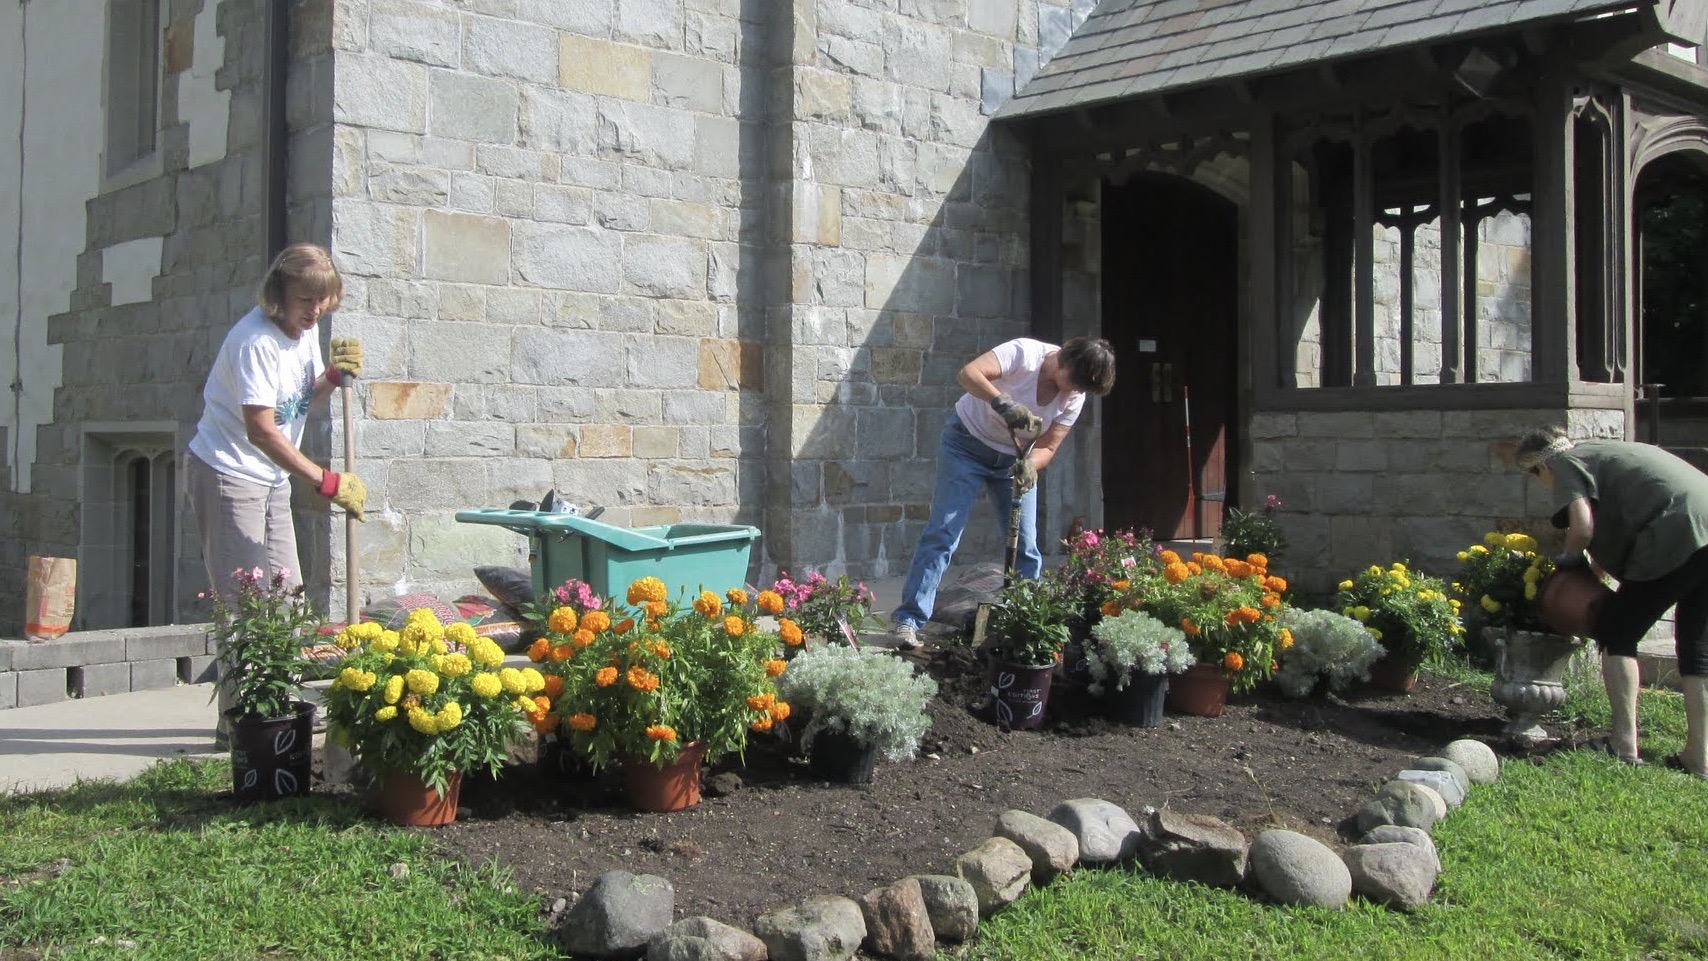 Members building gardens on church grounds 